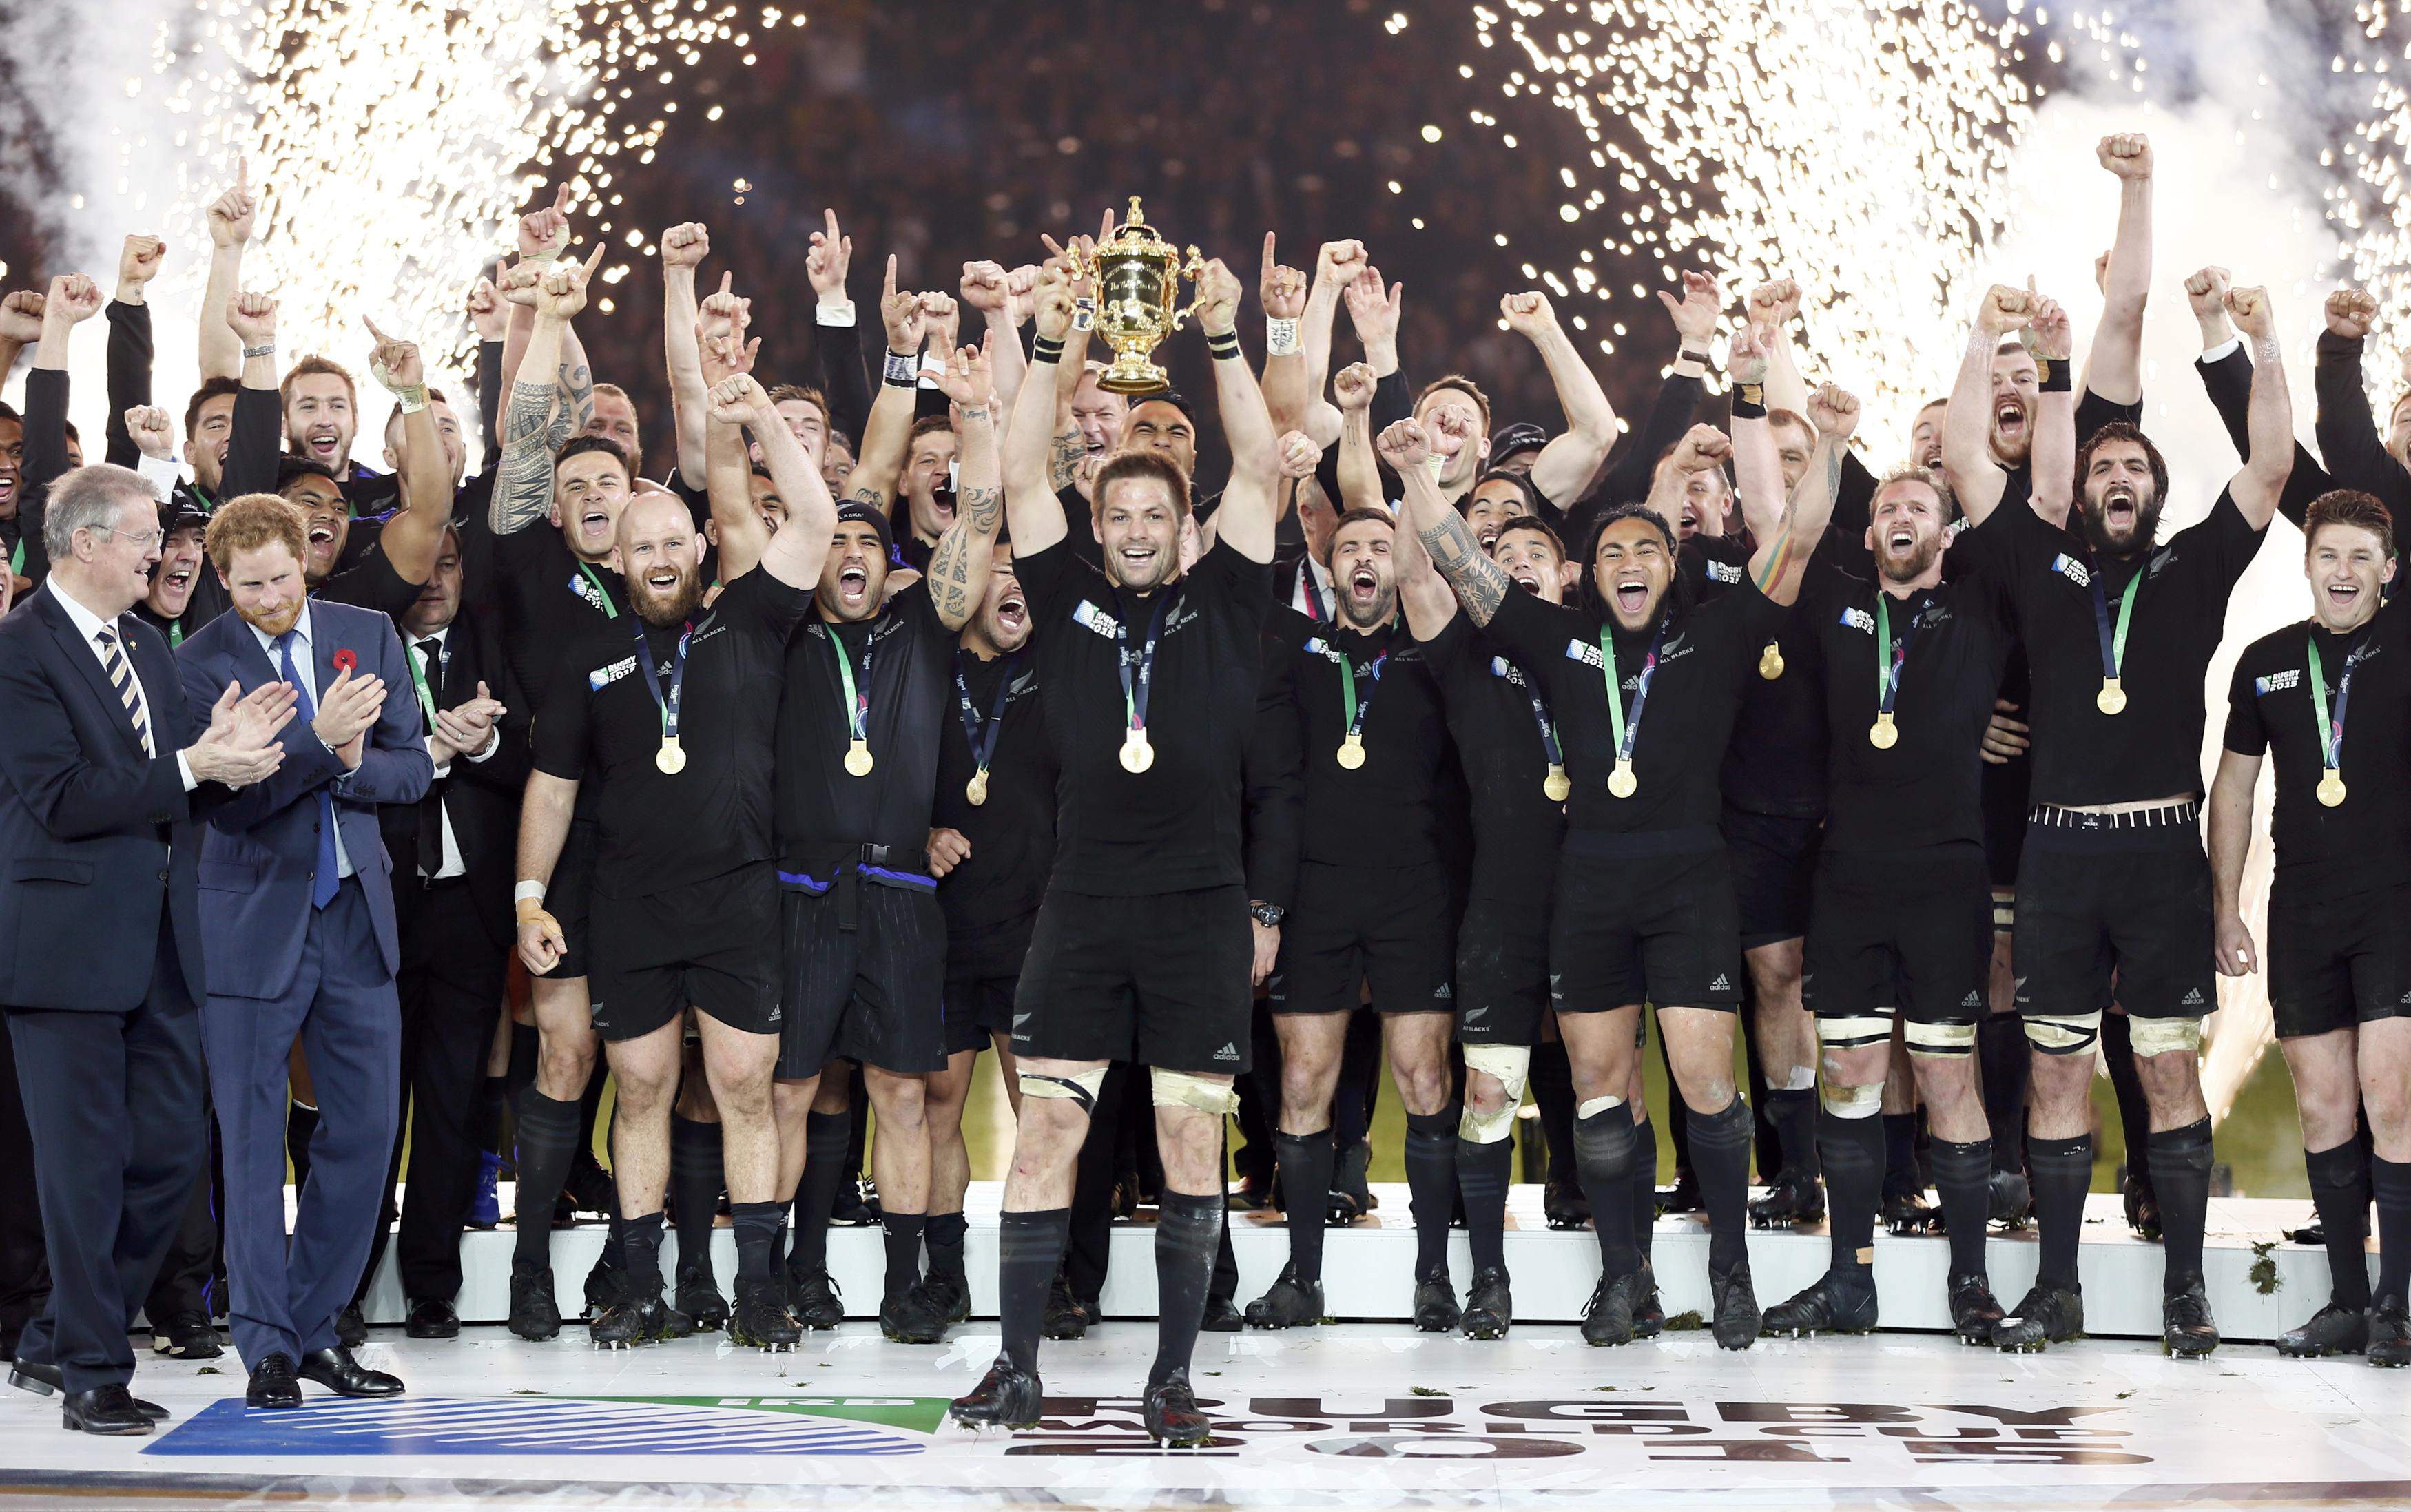 Prince Harry of Britain (2nd L) applauds as Richie McCaw of New Zealand (C) holds up the Webb Ellis trophy after winning the Rugby World Cup Final against Australia at Twickenham in London, October 31, 2015. REUTERS/Stefan Wermuth   Picture Supplied by Action Images